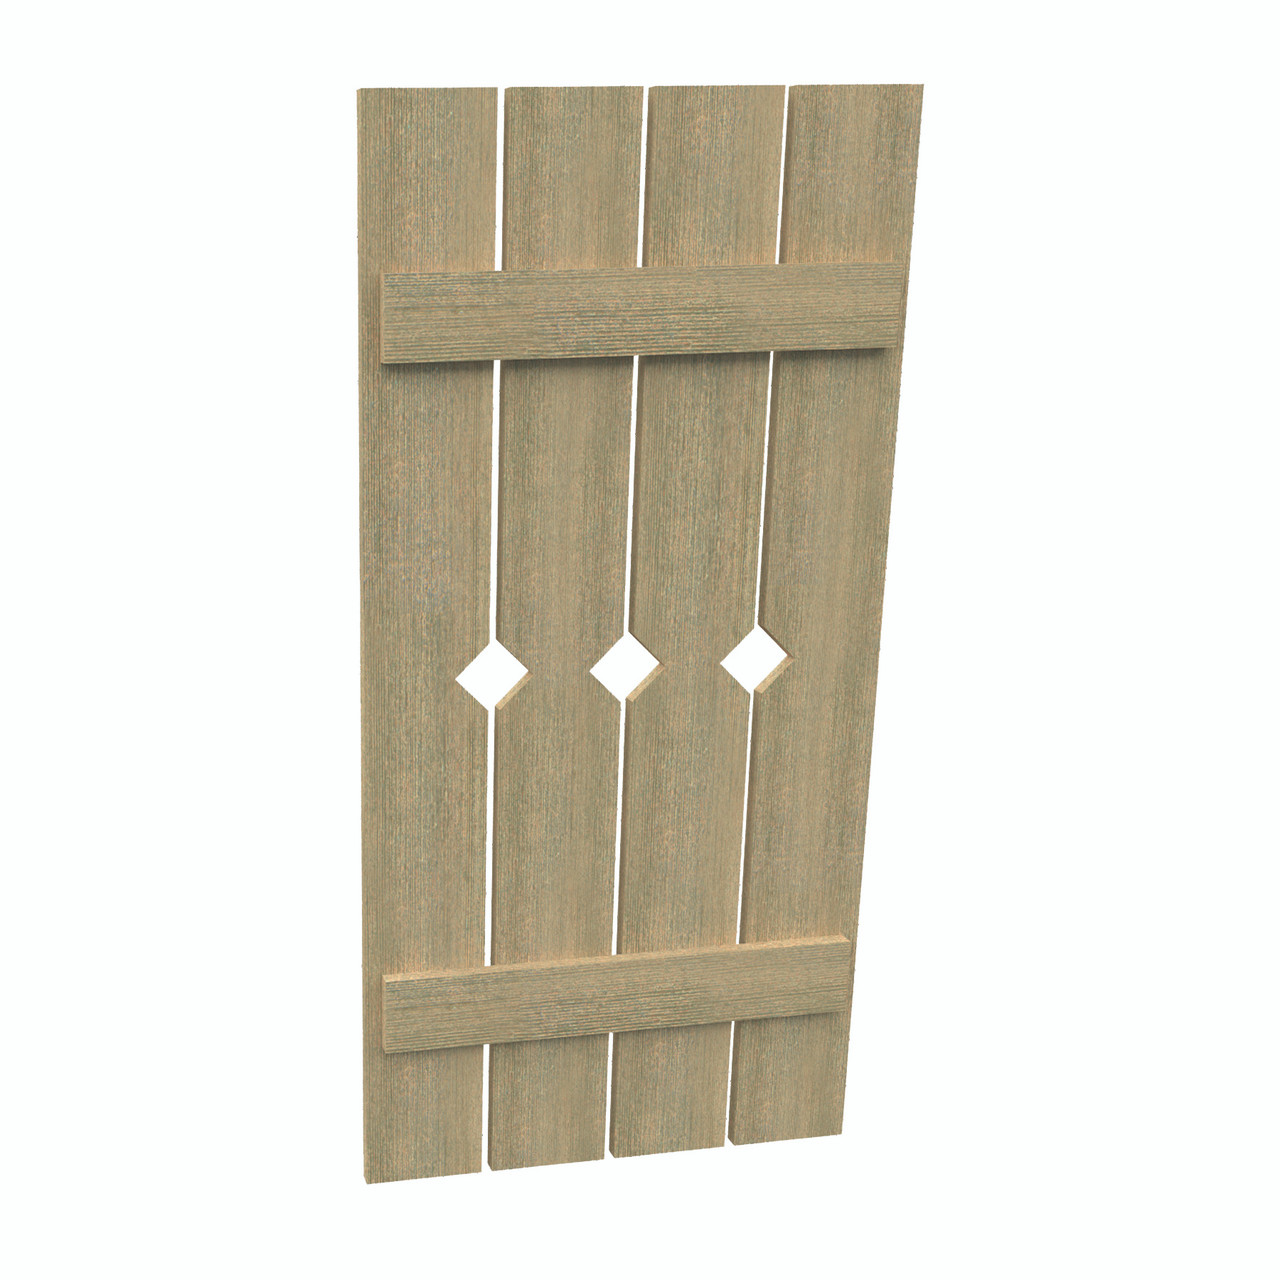 24 inch by 69 inch Plank Shutter with 4-Plank, Diamond